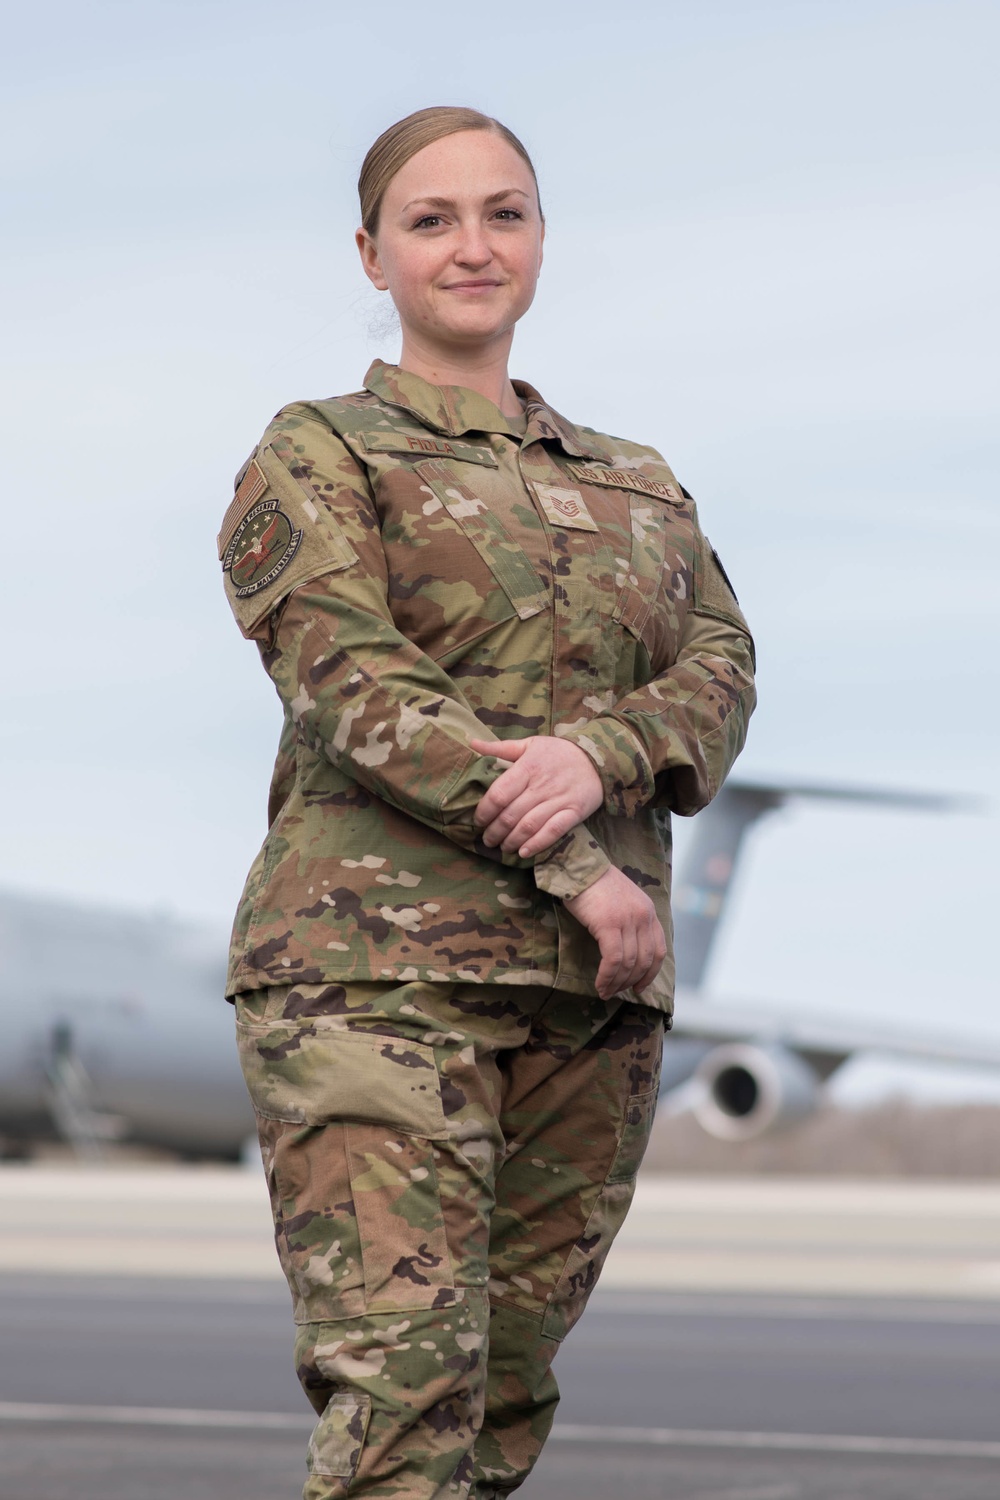 Dover Air Force Base Women's History Month Profiles